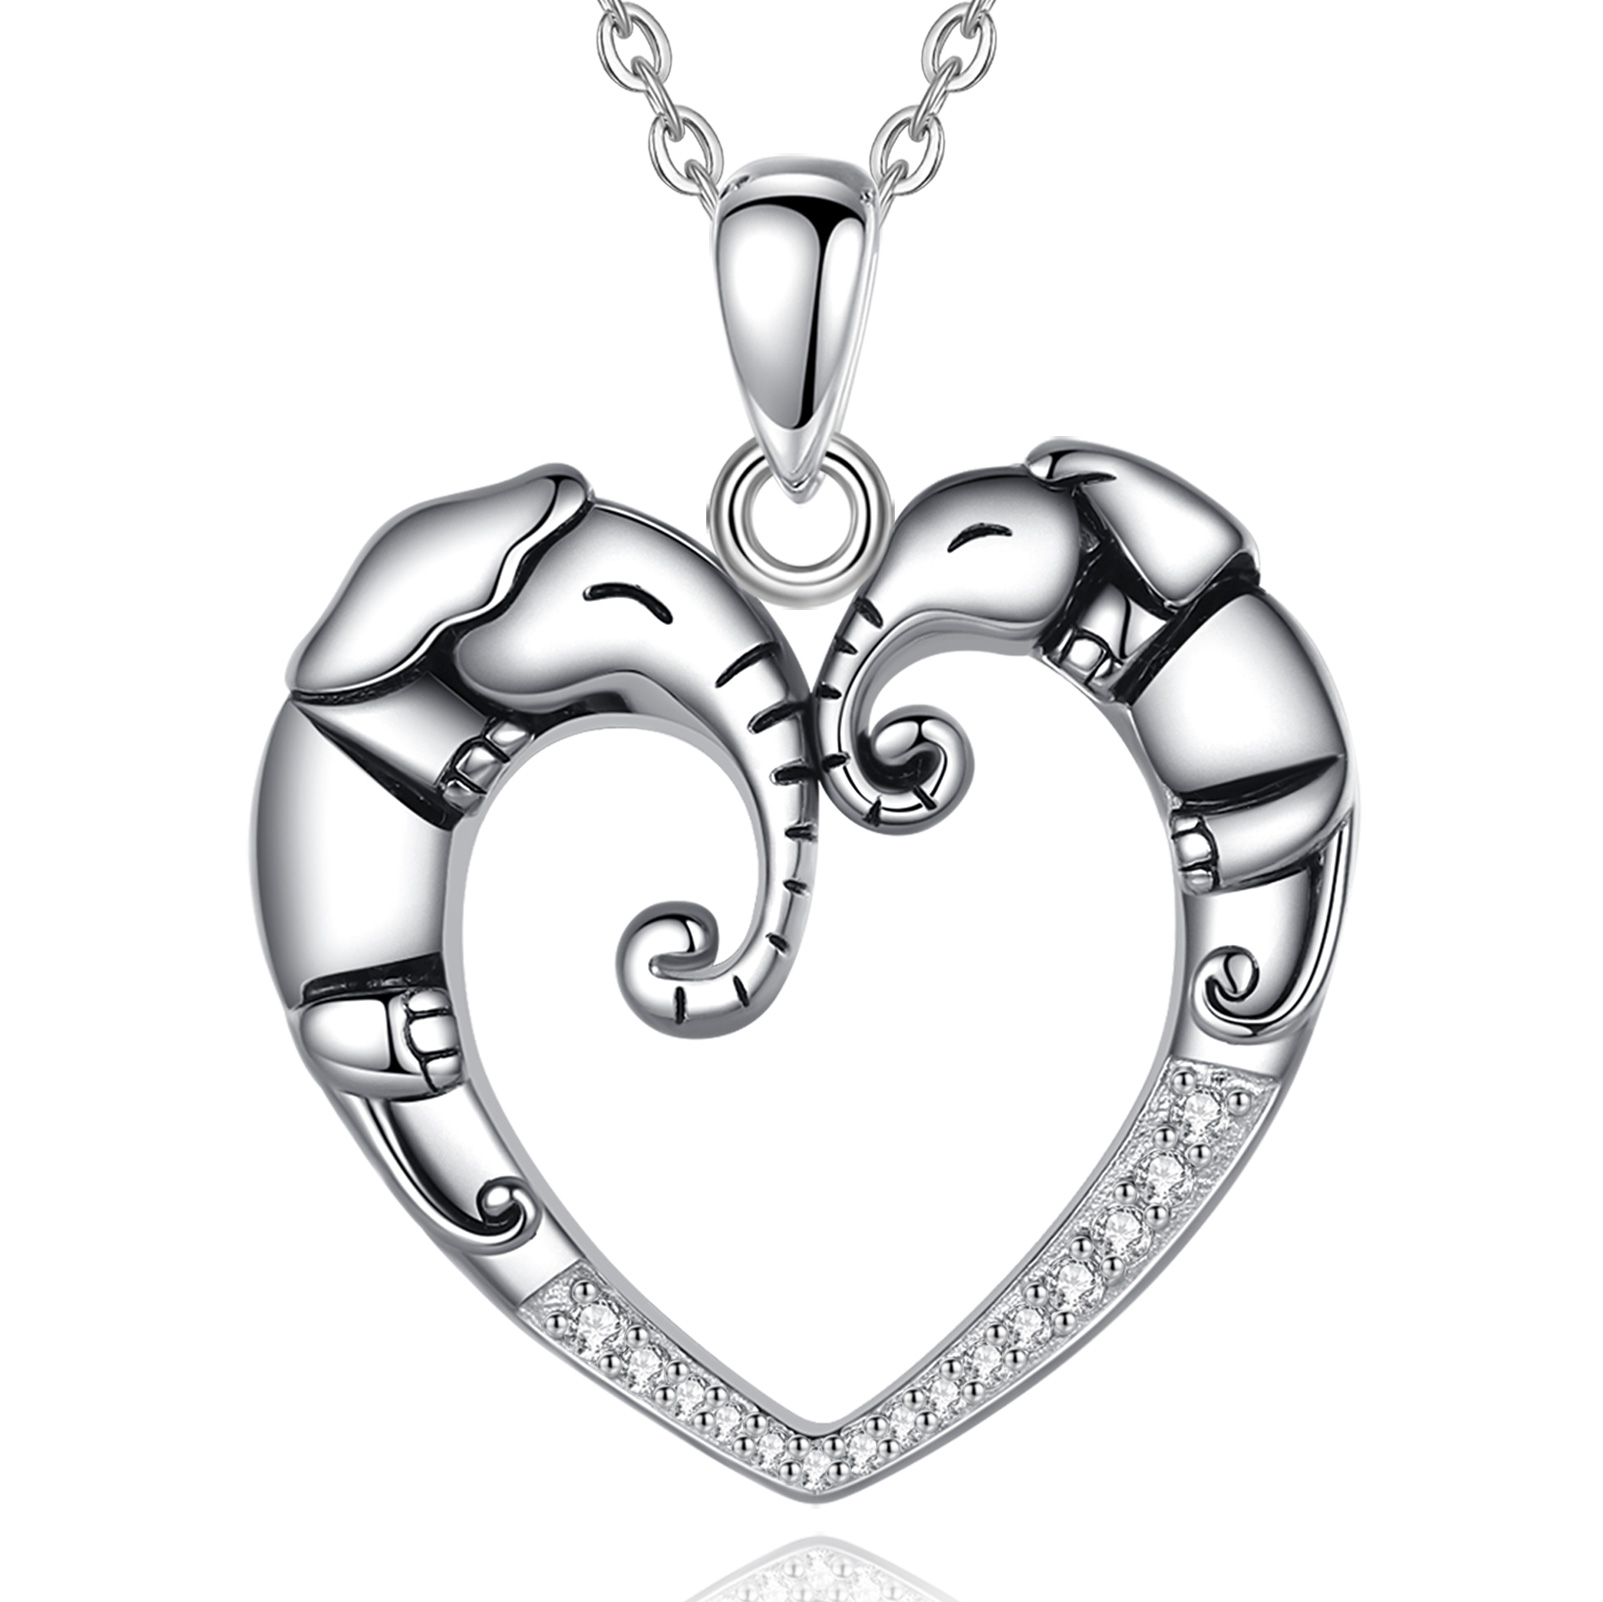 Merryshine Jewelry 925 Sterling Silver Heart Shaped Mother Elephant and Child Baby Elephant Necklace